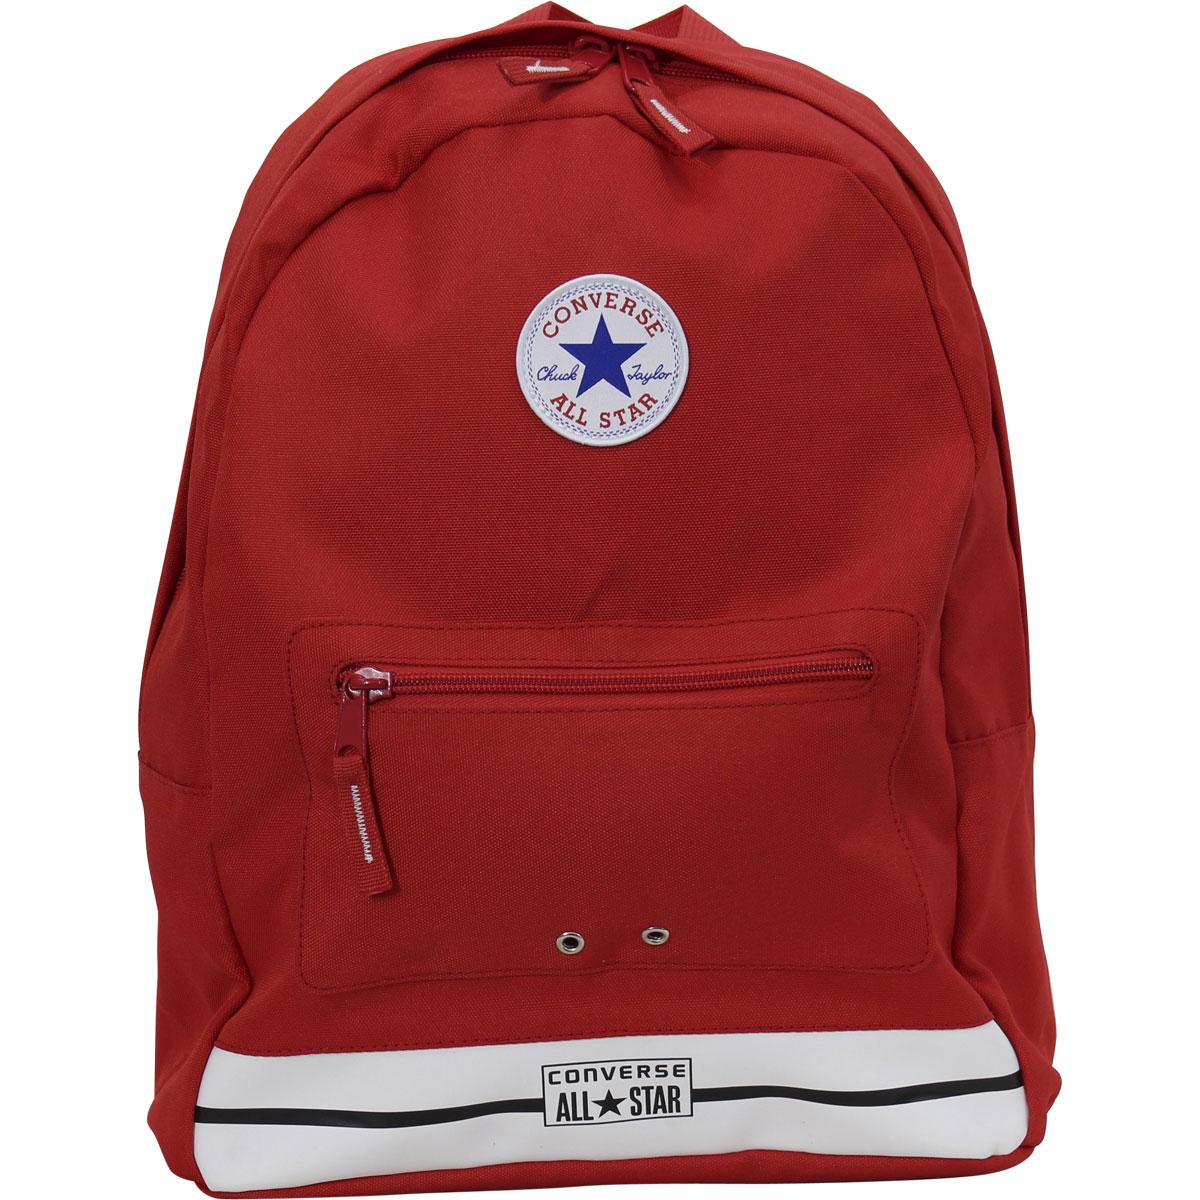 converse chuck taylor all star backpack